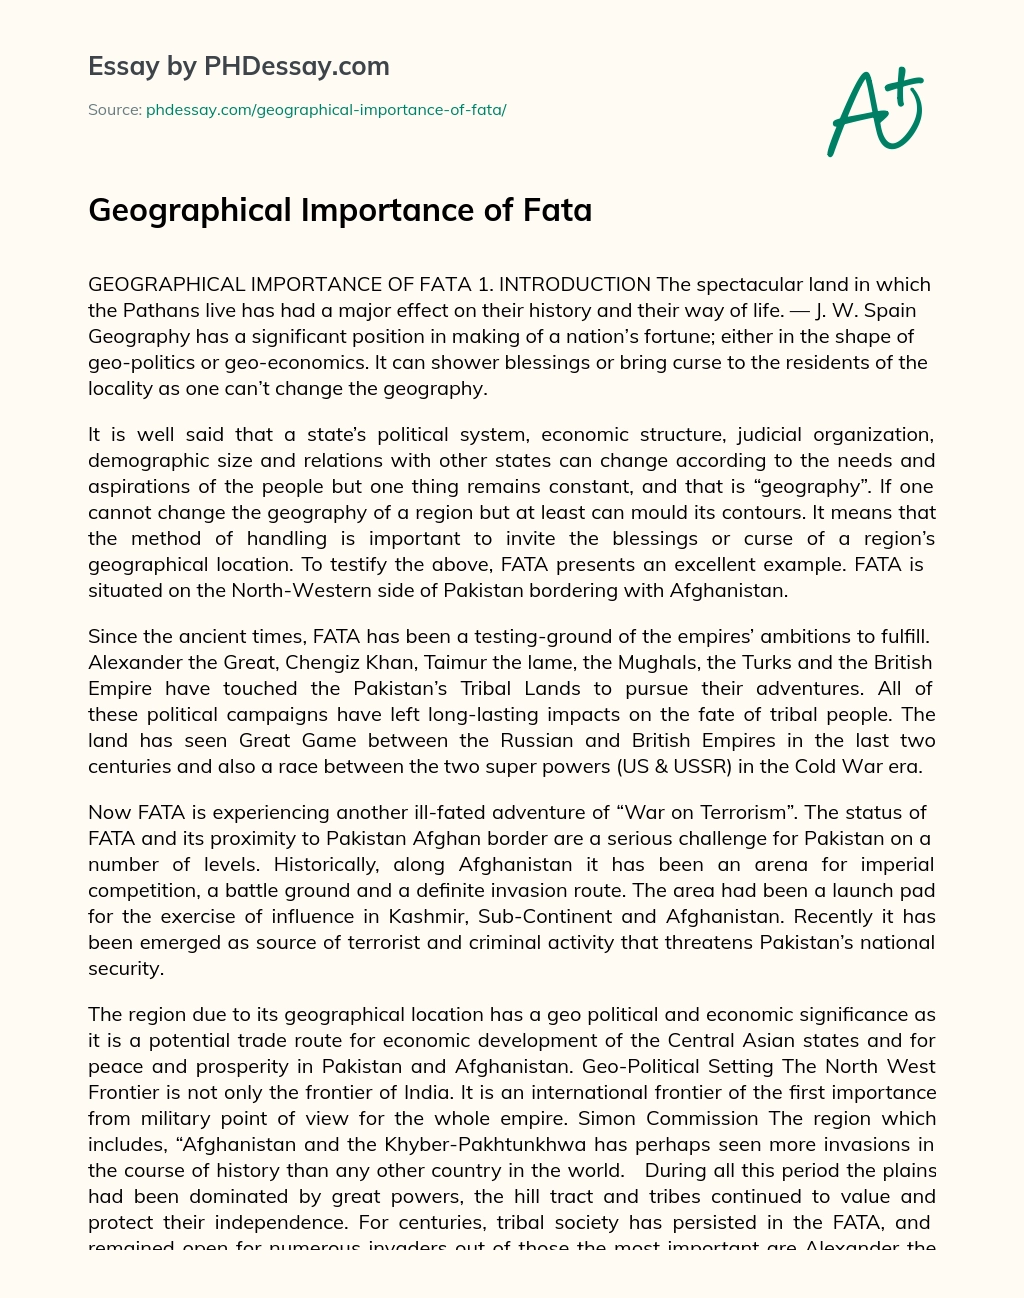 Geographical Importance of Fata essay